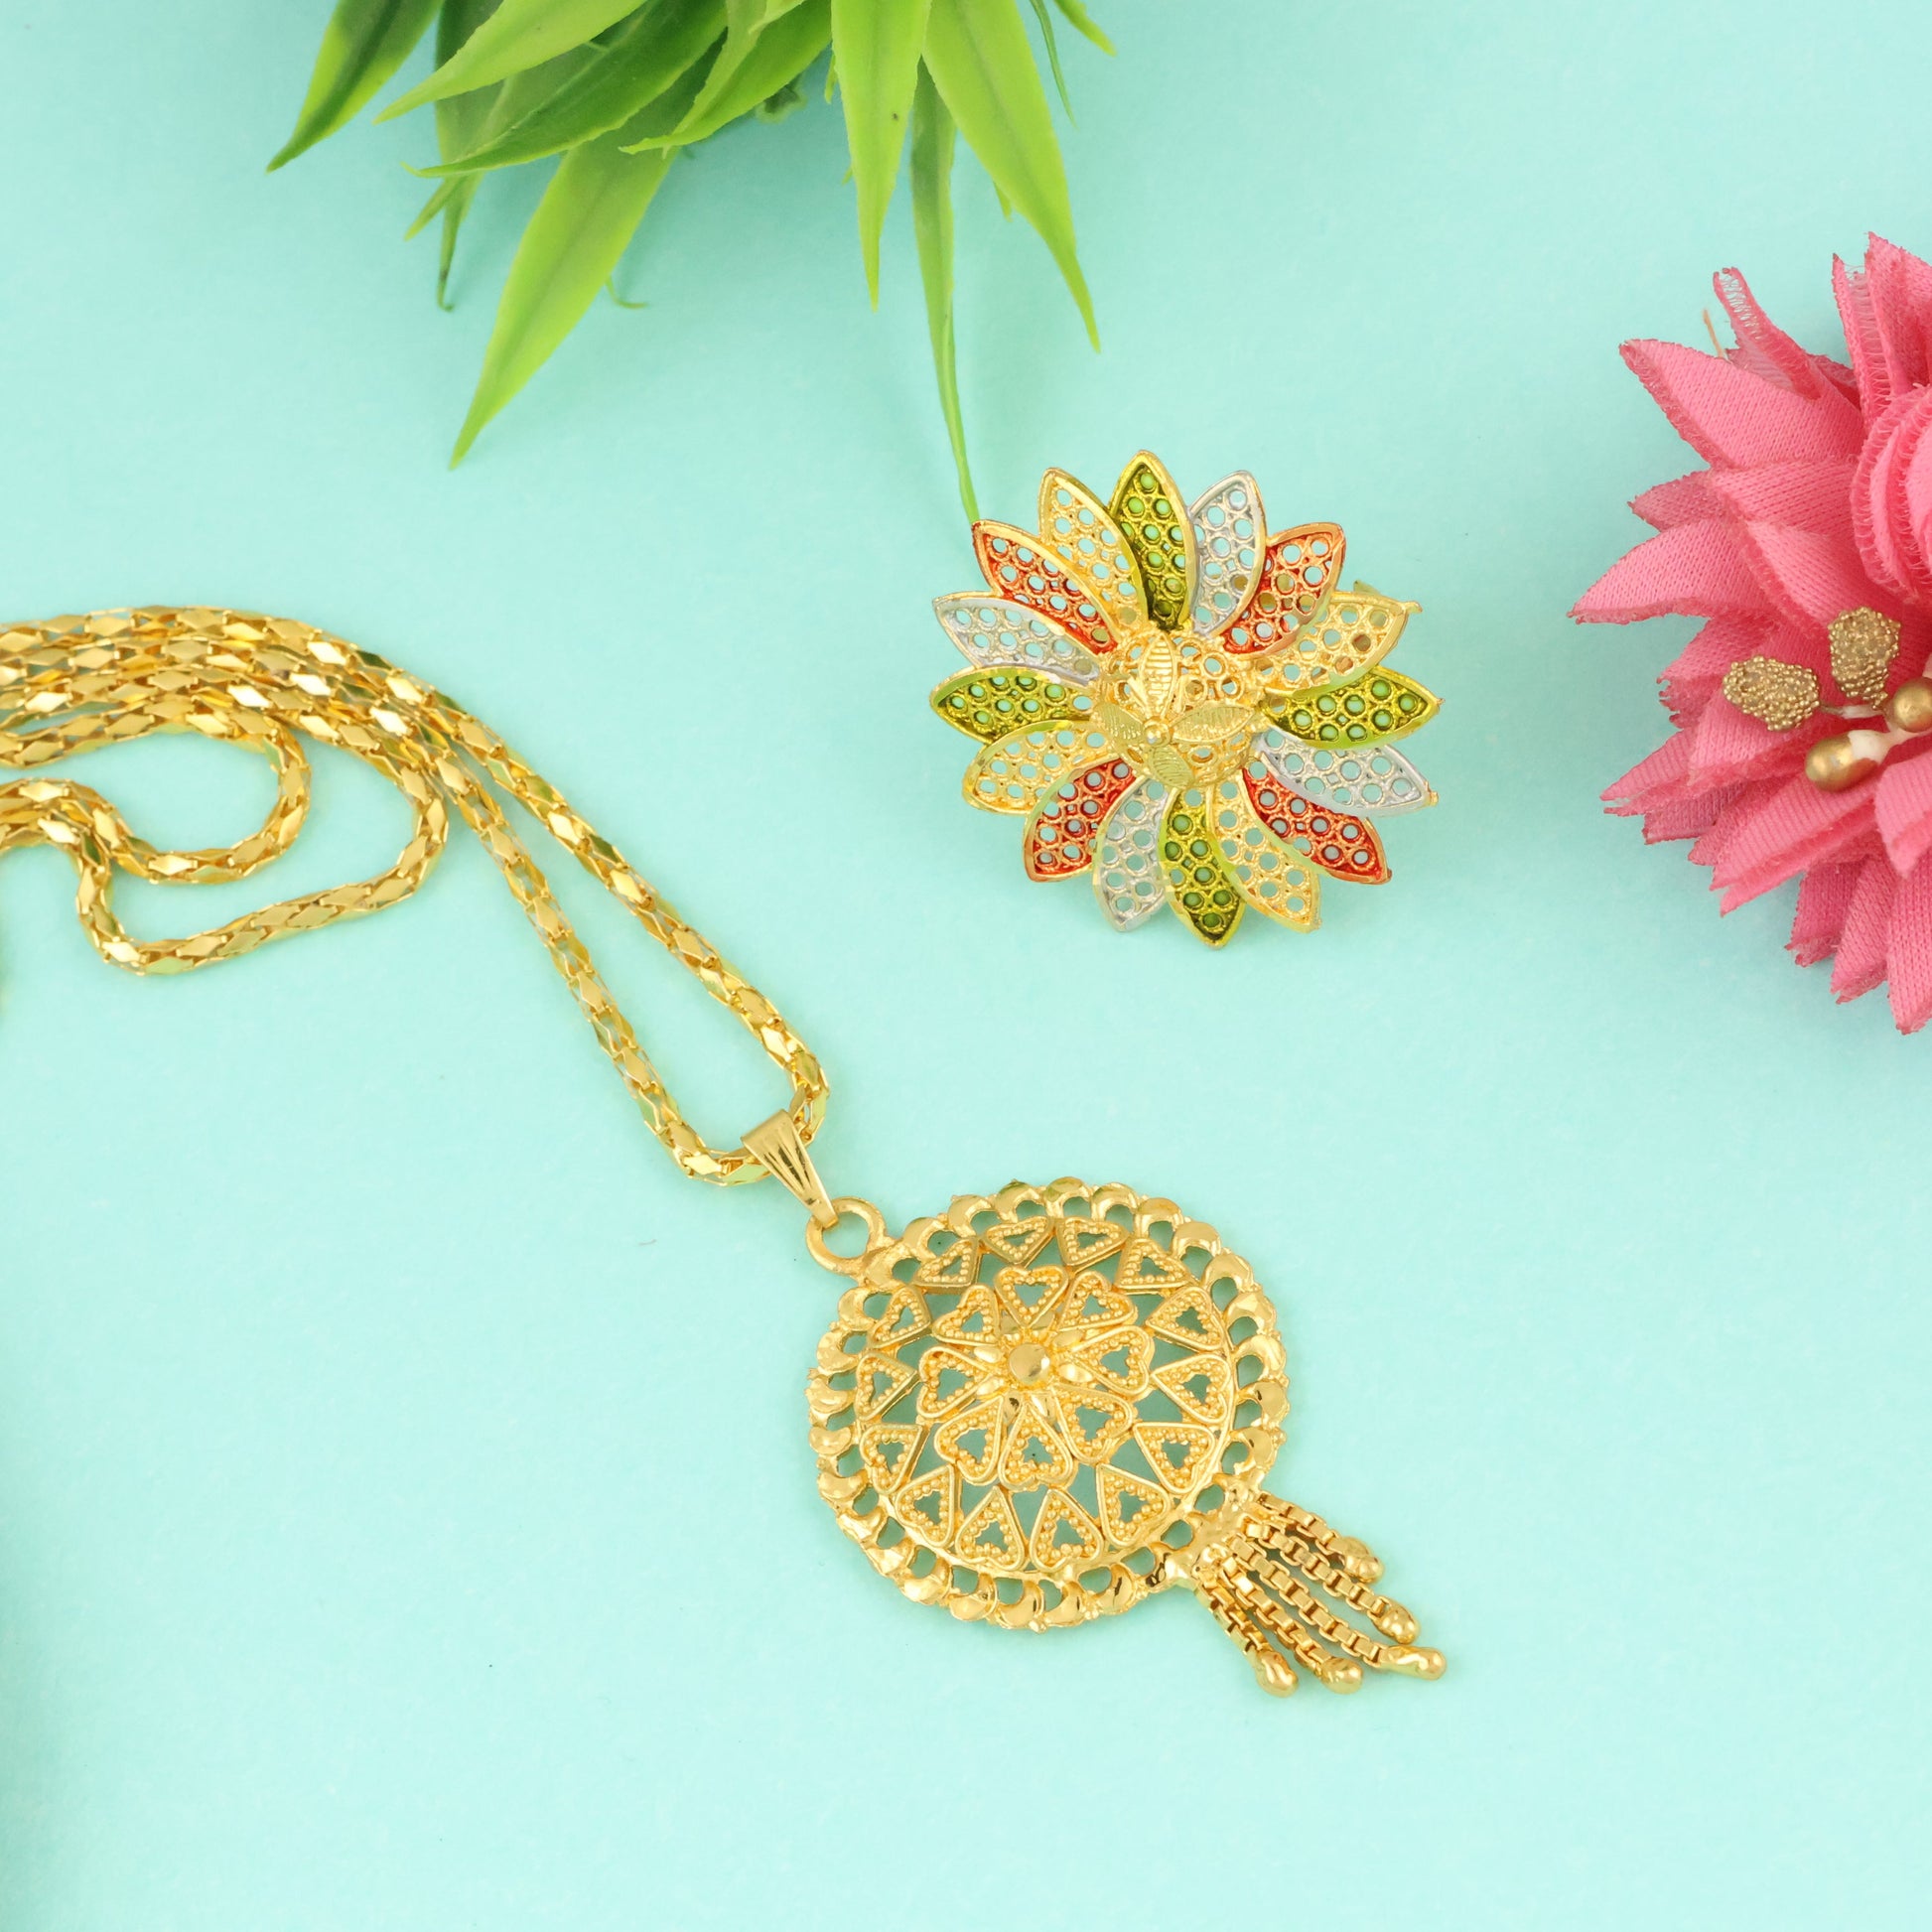 Mekkna Gold Plated Pendant with Rings Collection - Shop Now!